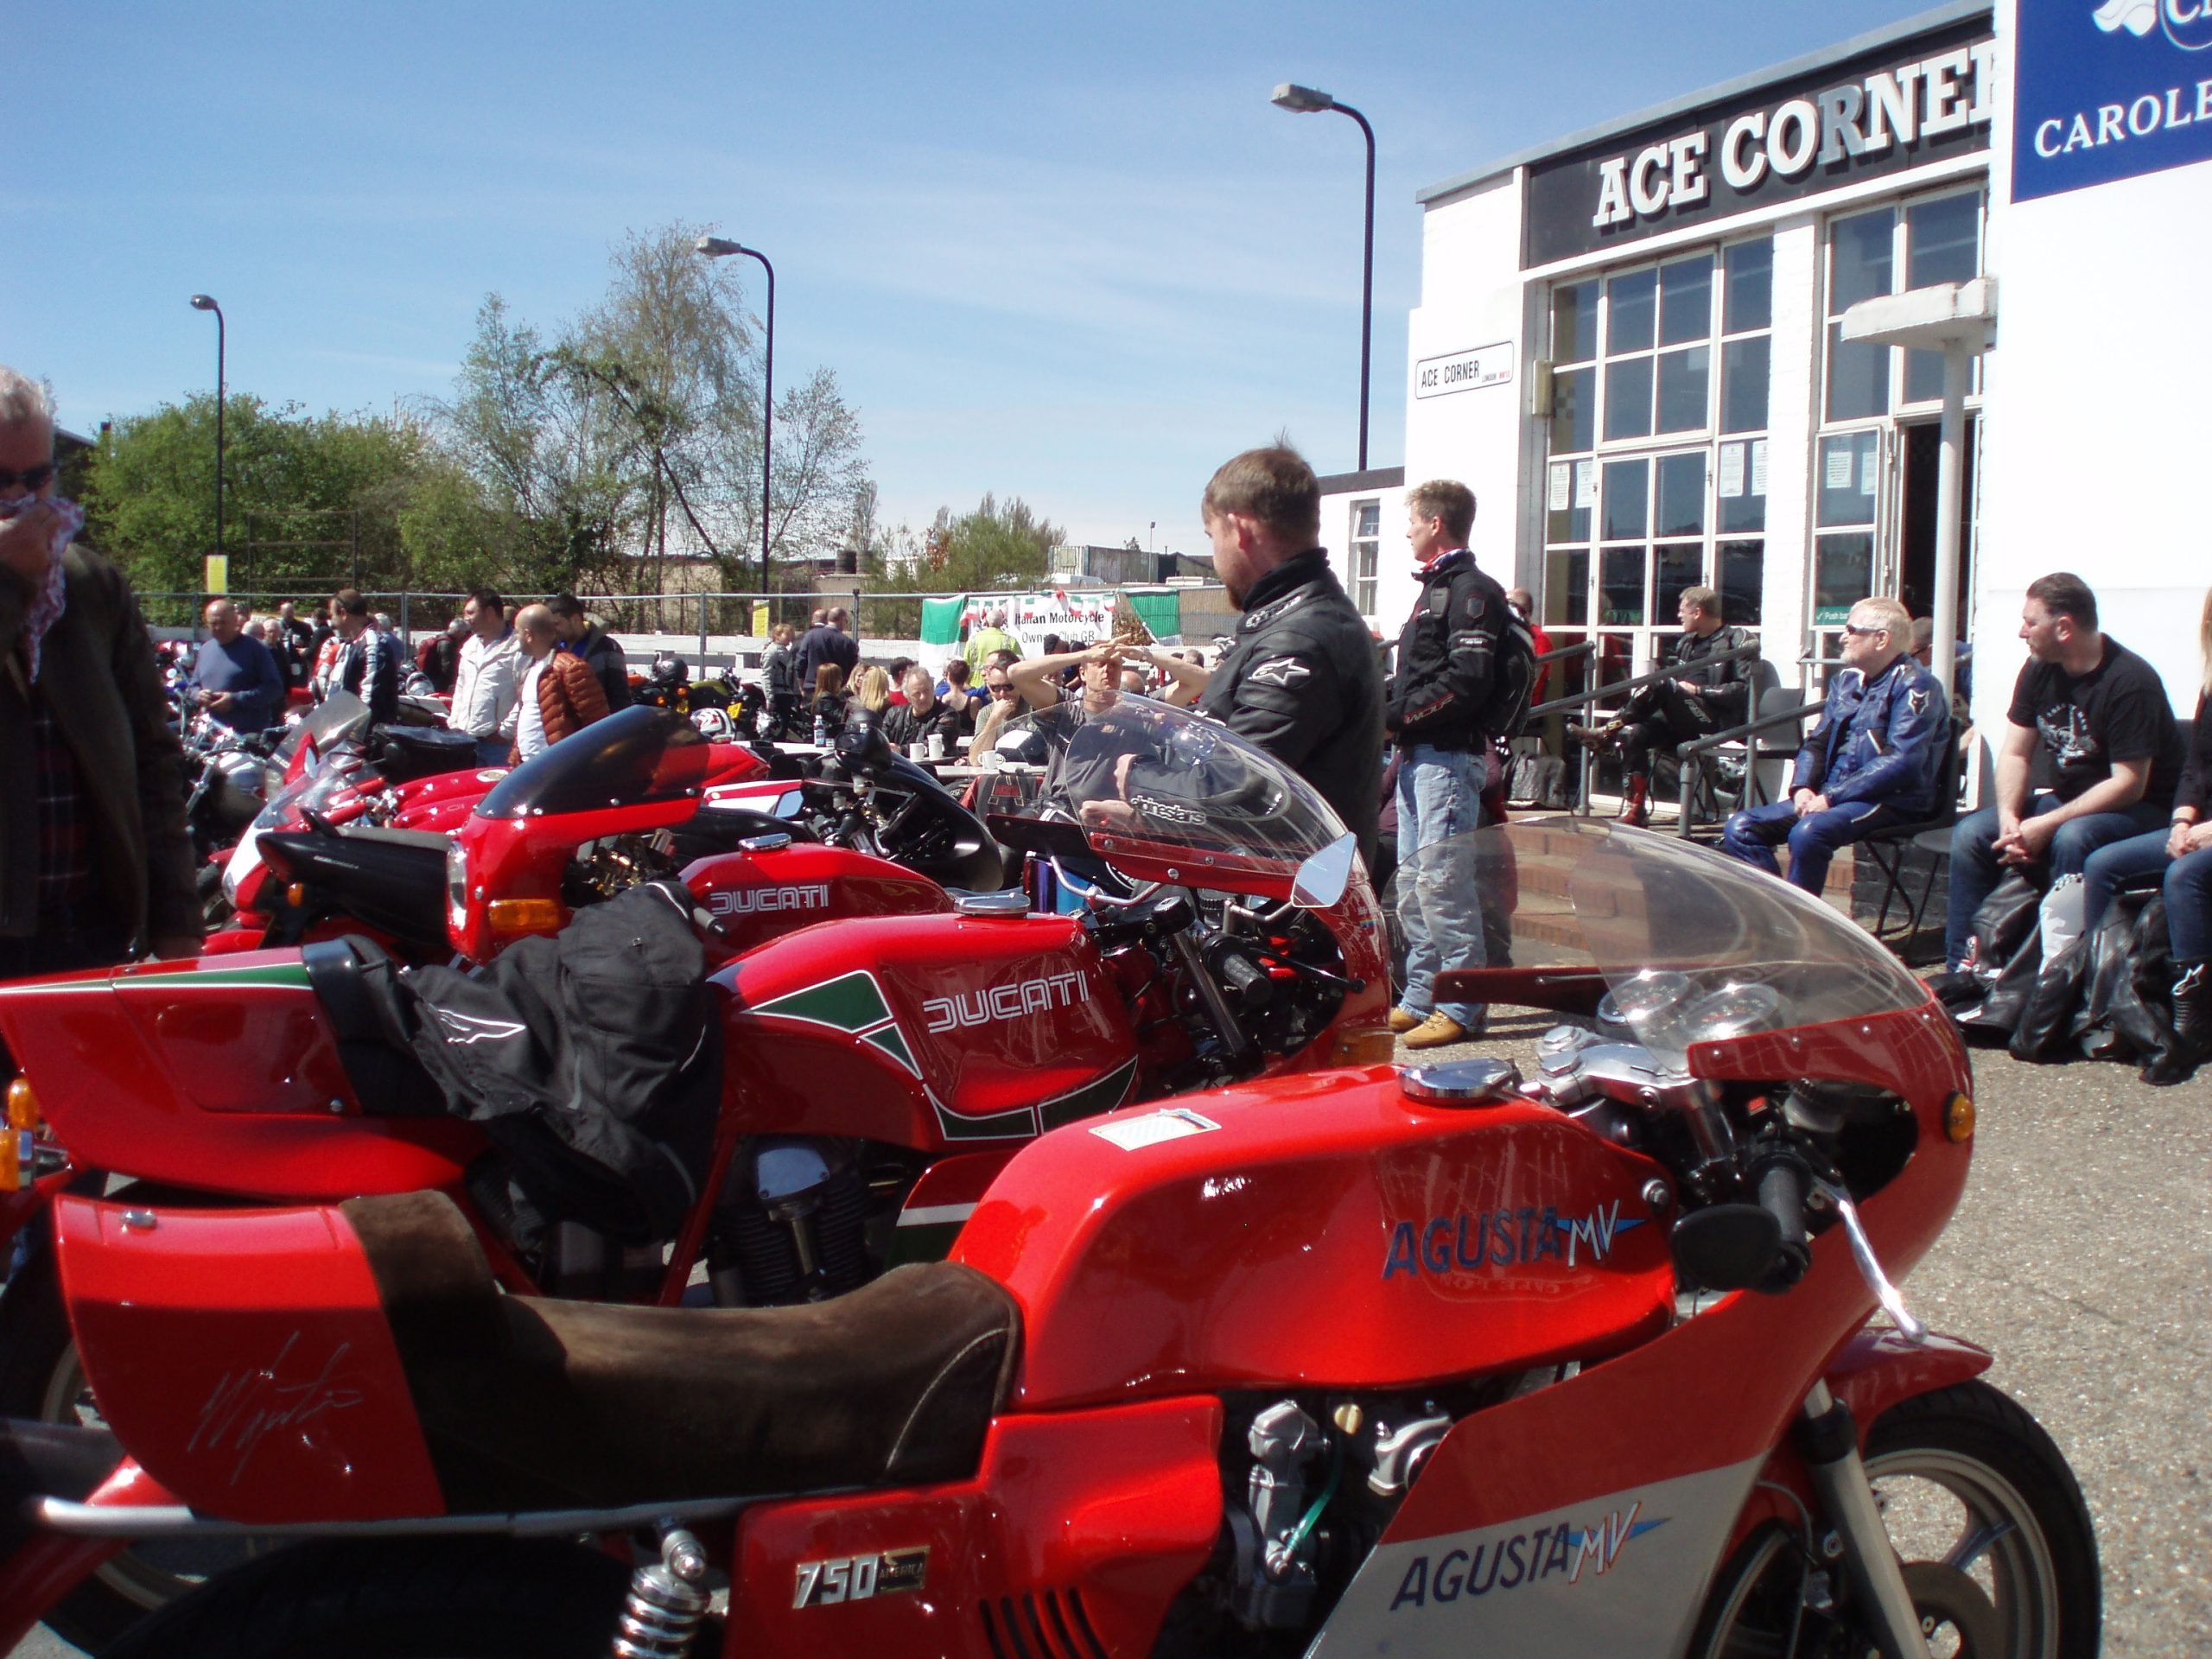 Italian Bike Day With Imoc At The Ace Cafe London